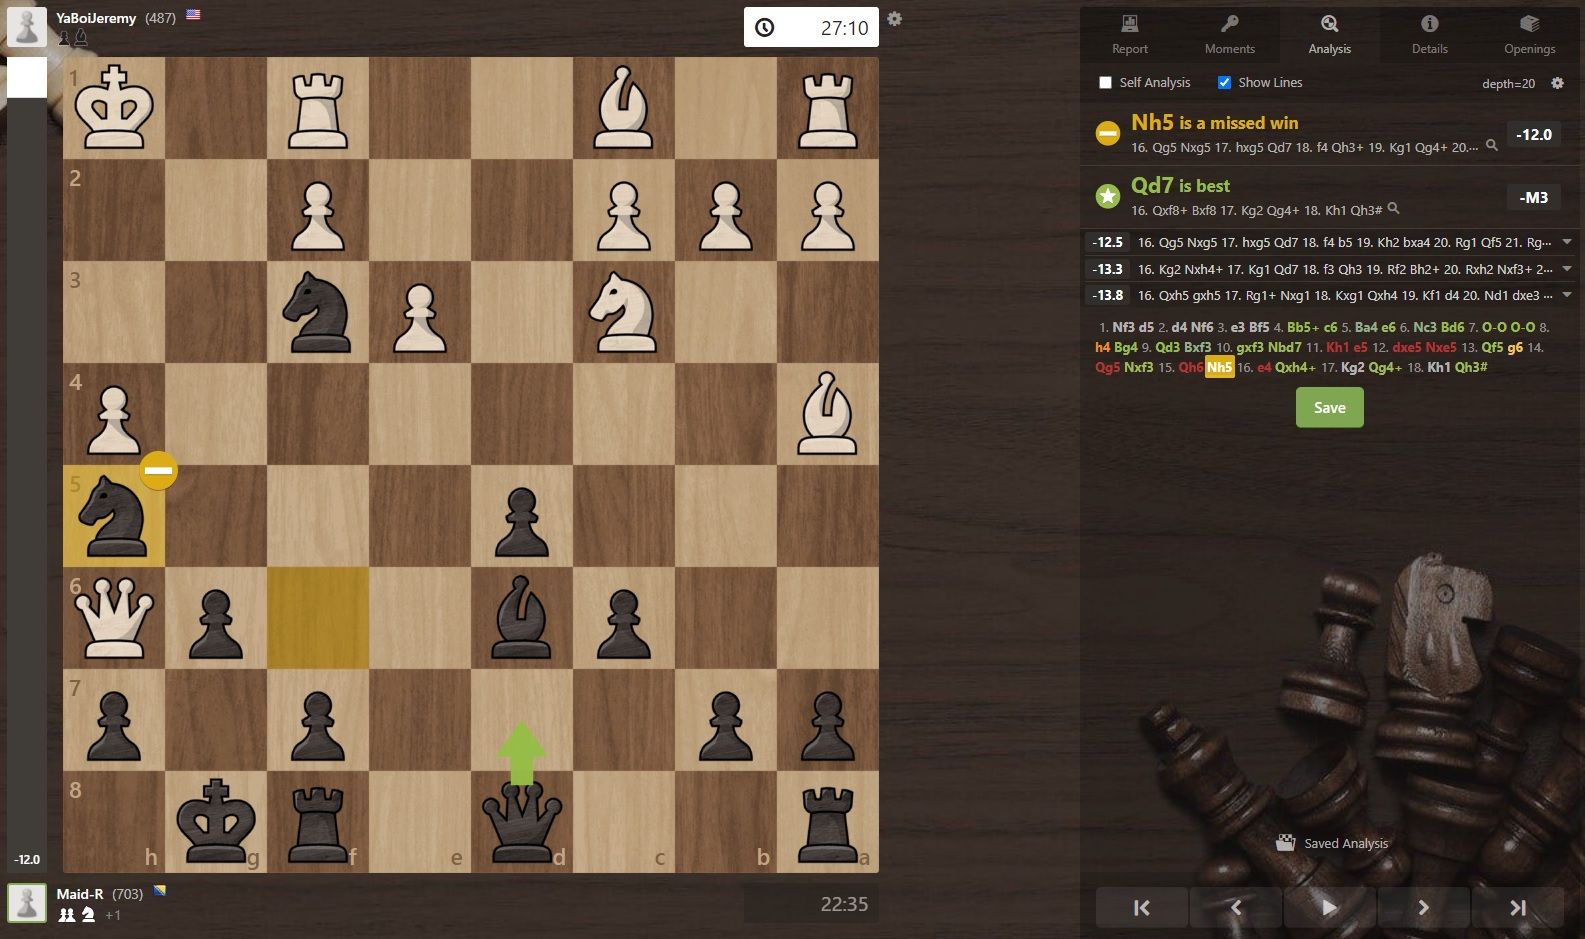 Chess.com's Mittens is one brutal chess bot.